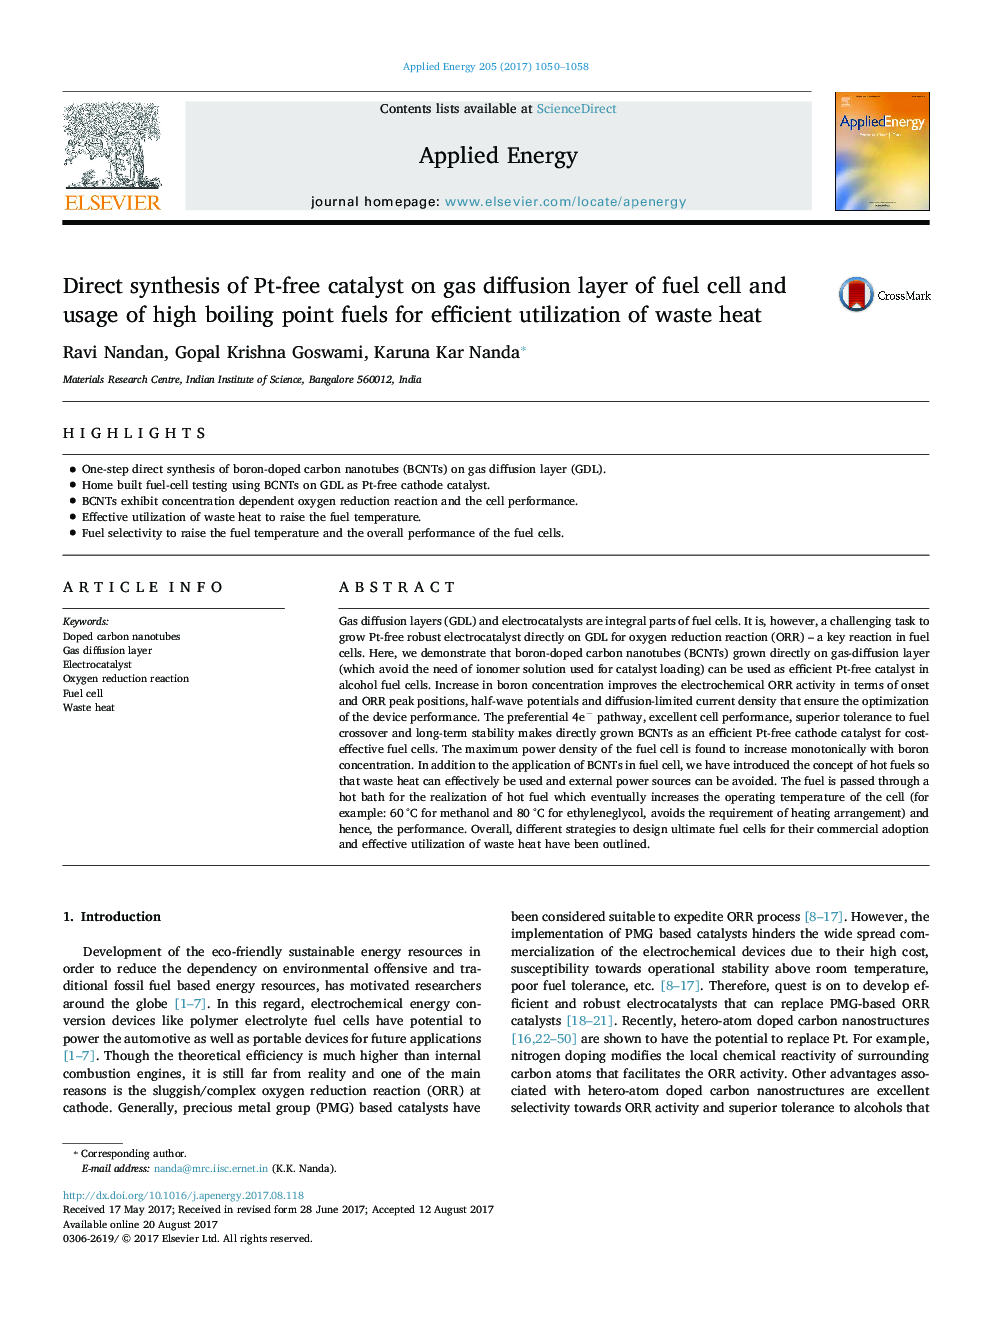 Direct synthesis of Pt-free catalyst on gas diffusion layer of fuel cell and usage of high boiling point fuels for efficient utilization of waste heat